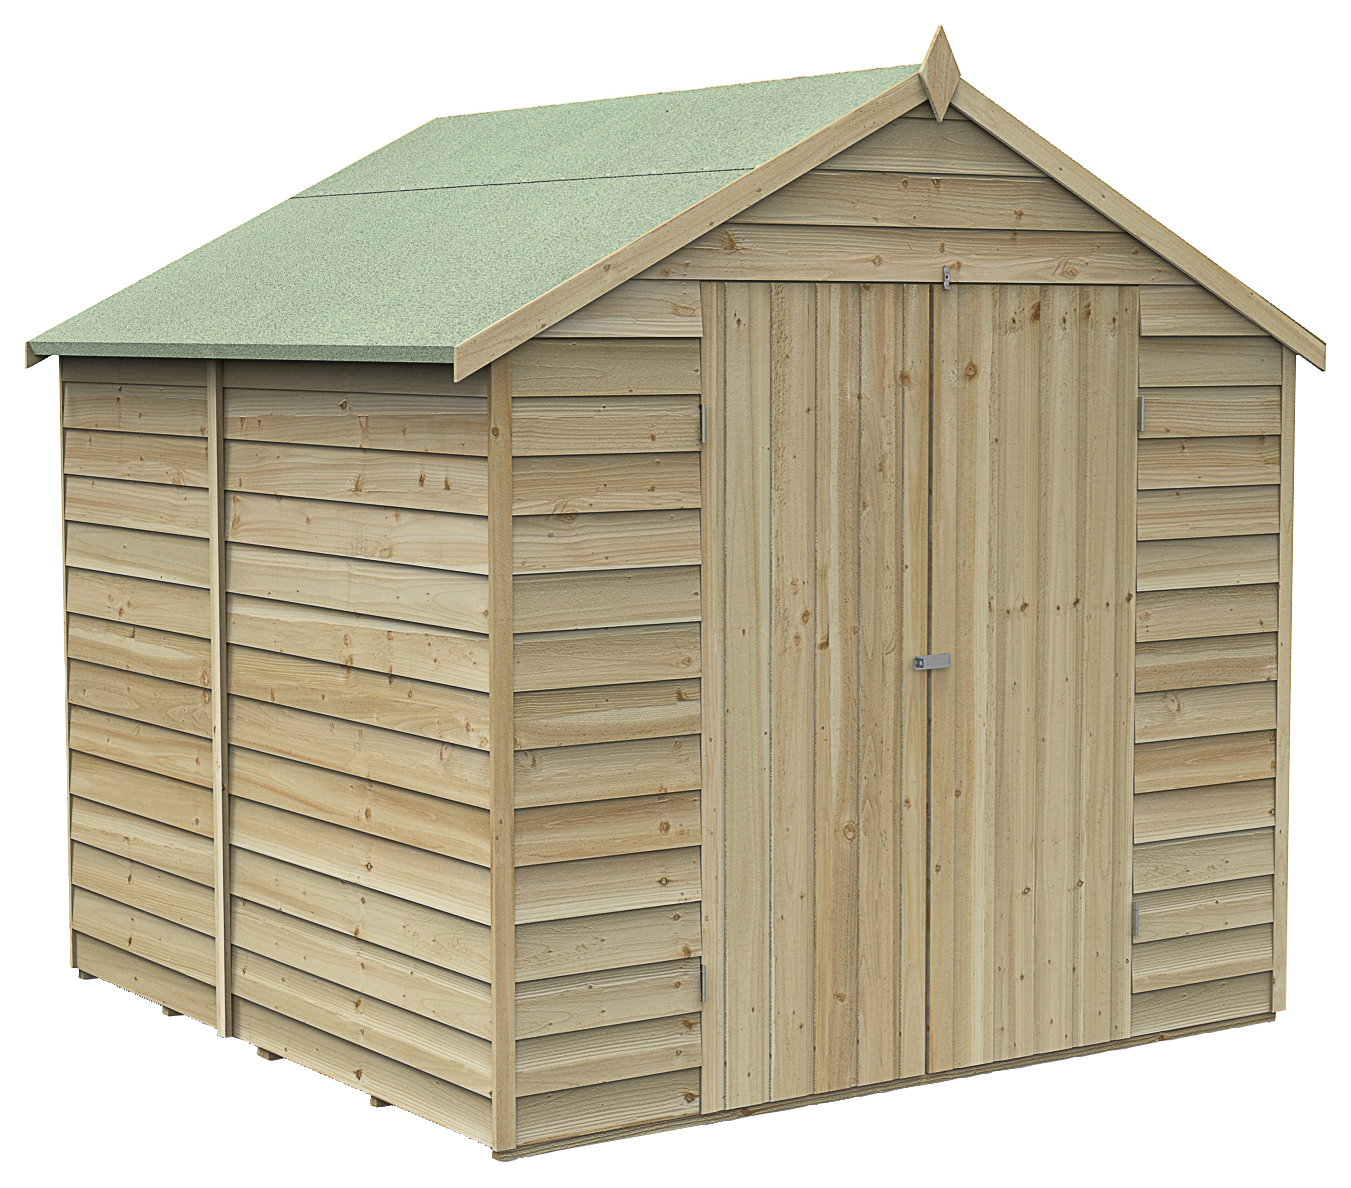 Forest Garden 7 x 7ft 4Life Apex Overlap Pressure Treated Double Door Windowless Shed with Base and Assembly